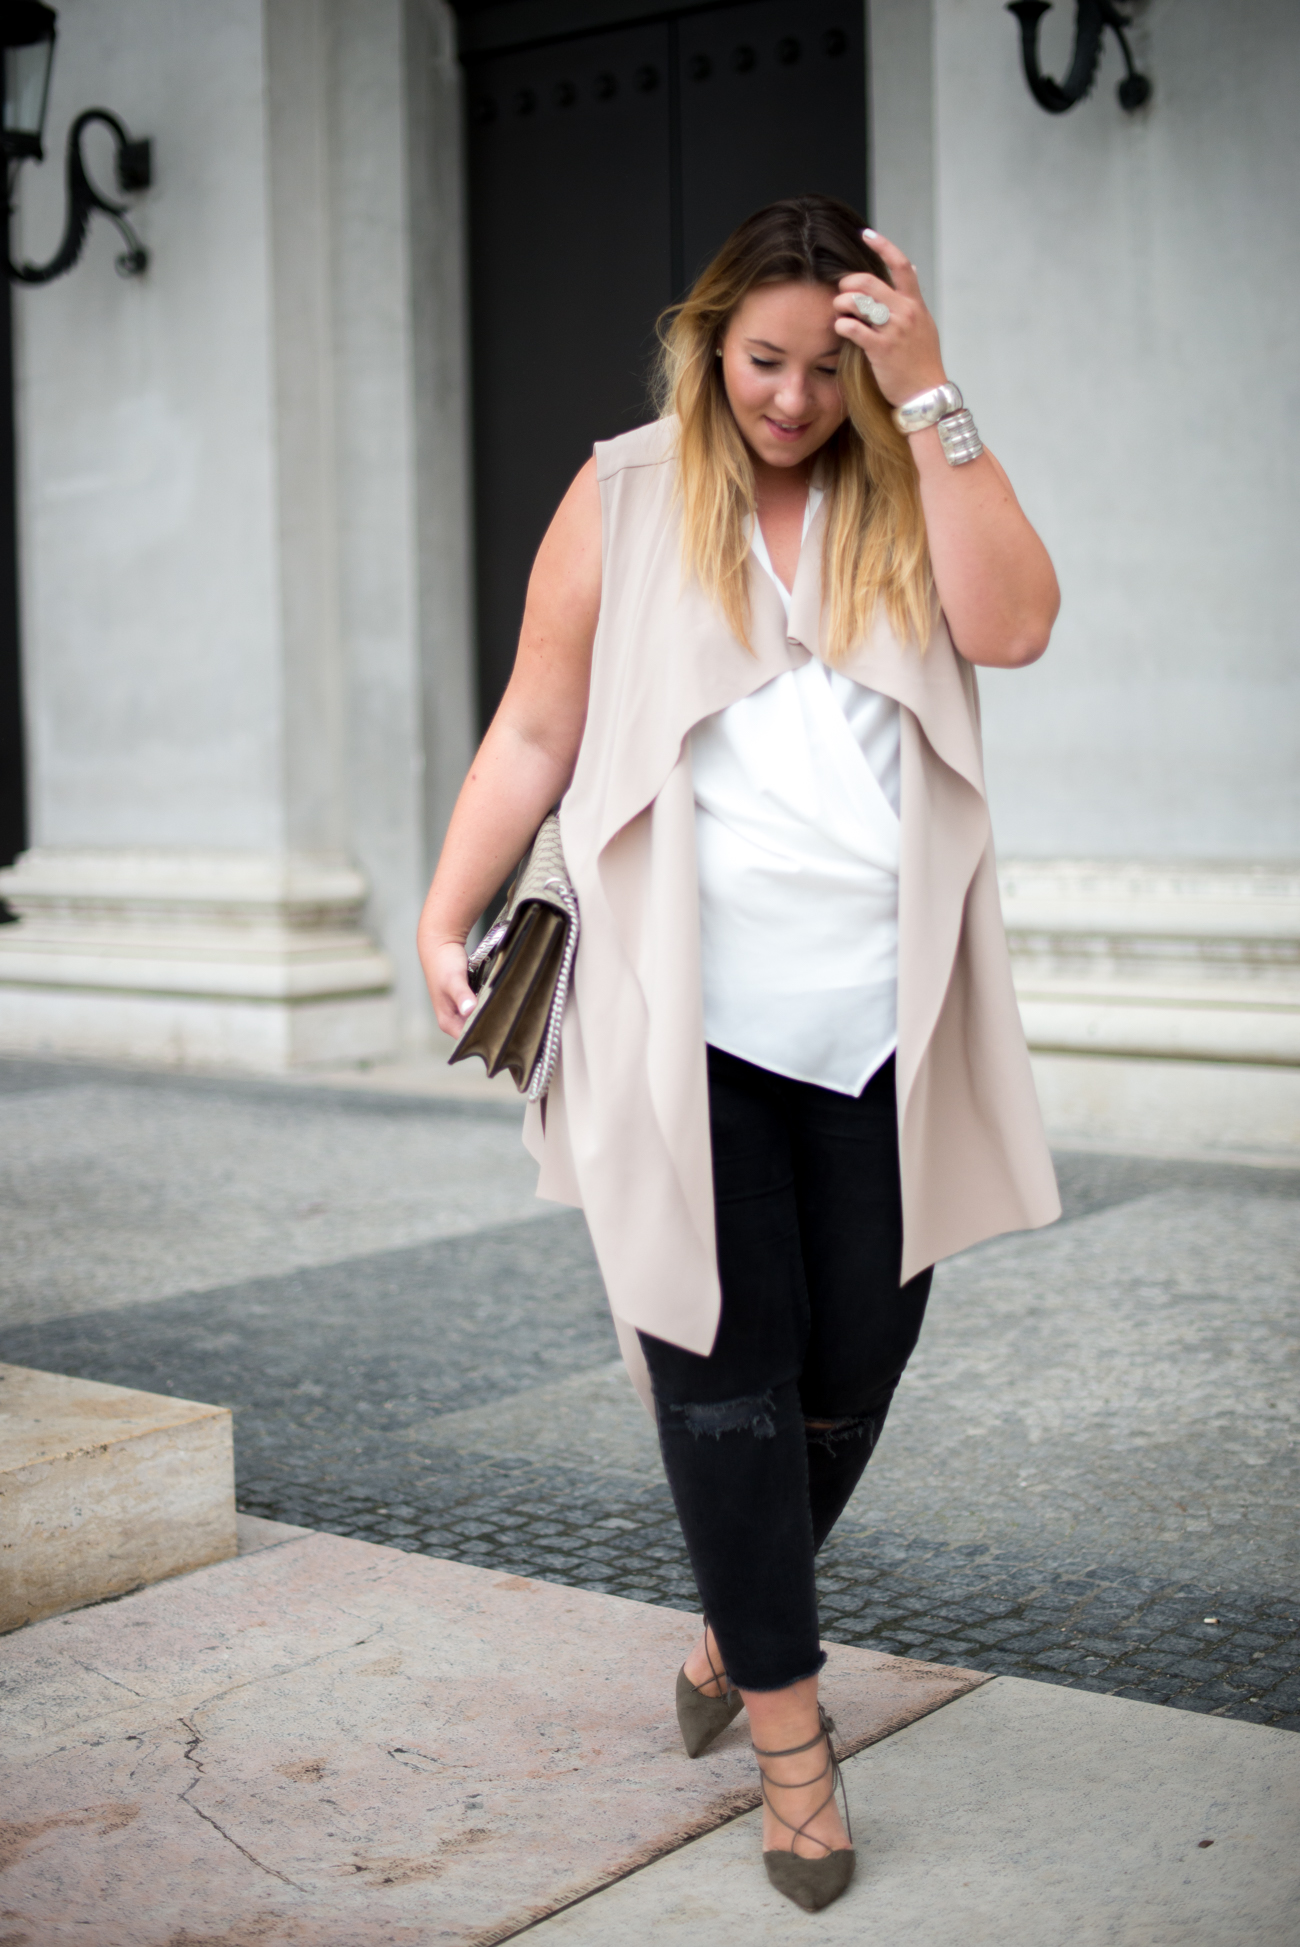 The Skinny and the Curvy One_Fashion_blogger_Plussize_Soulfully_Marina Rinaldi_Asos_Asos Curve_Plus Size Blogger_Plus Size Münche_Fashionblogger München (9 von 10)